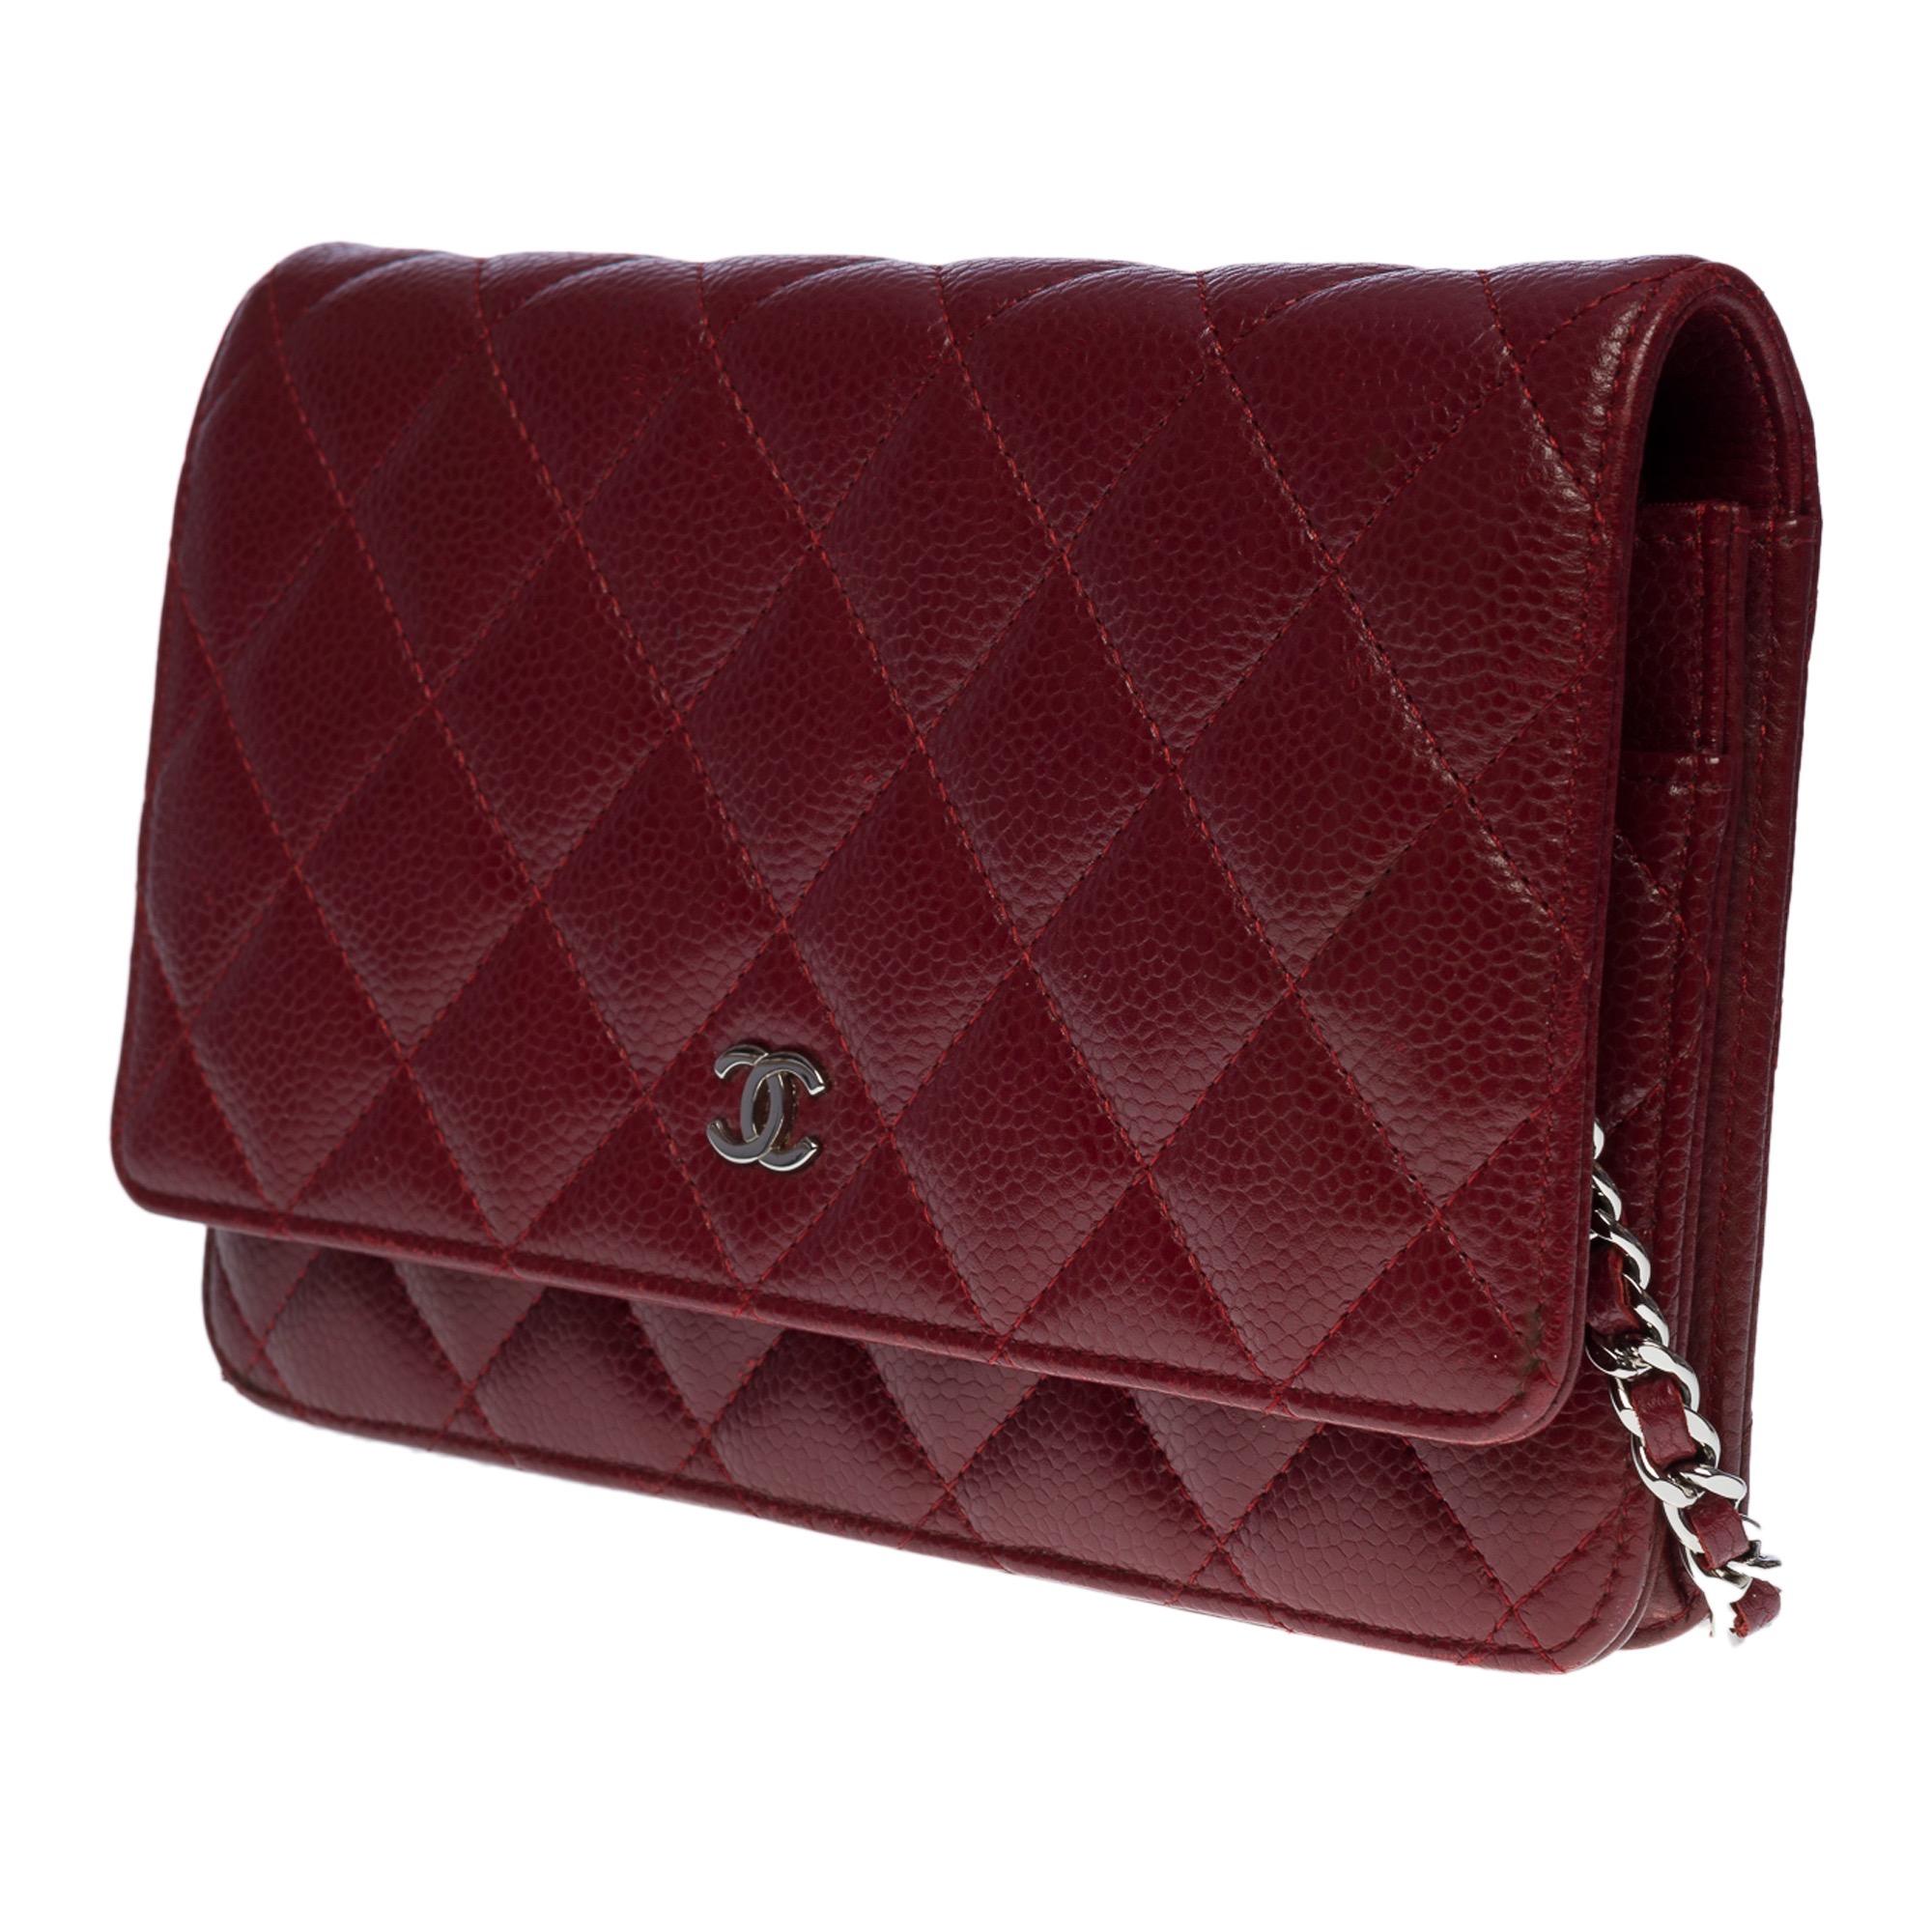 Women's Chanel Wallet On Chain handbag in burgundy quilted caviar leather, SHW